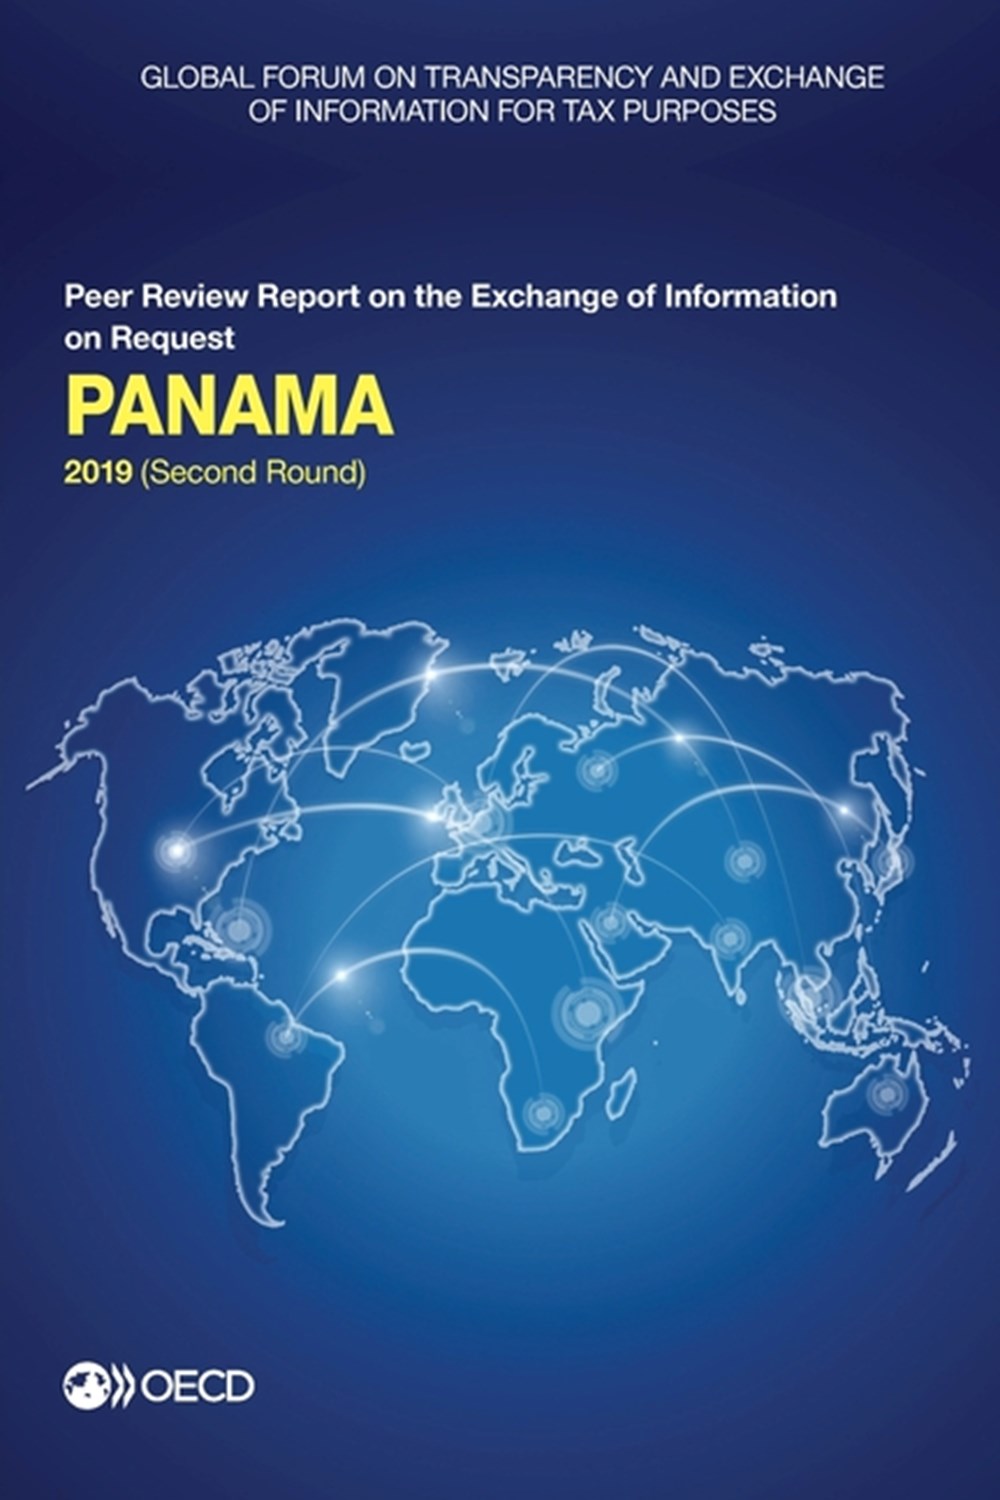 Global Forum on Transparency and Exchange of Information for Tax Purposes: Panama 2019 (Second Round